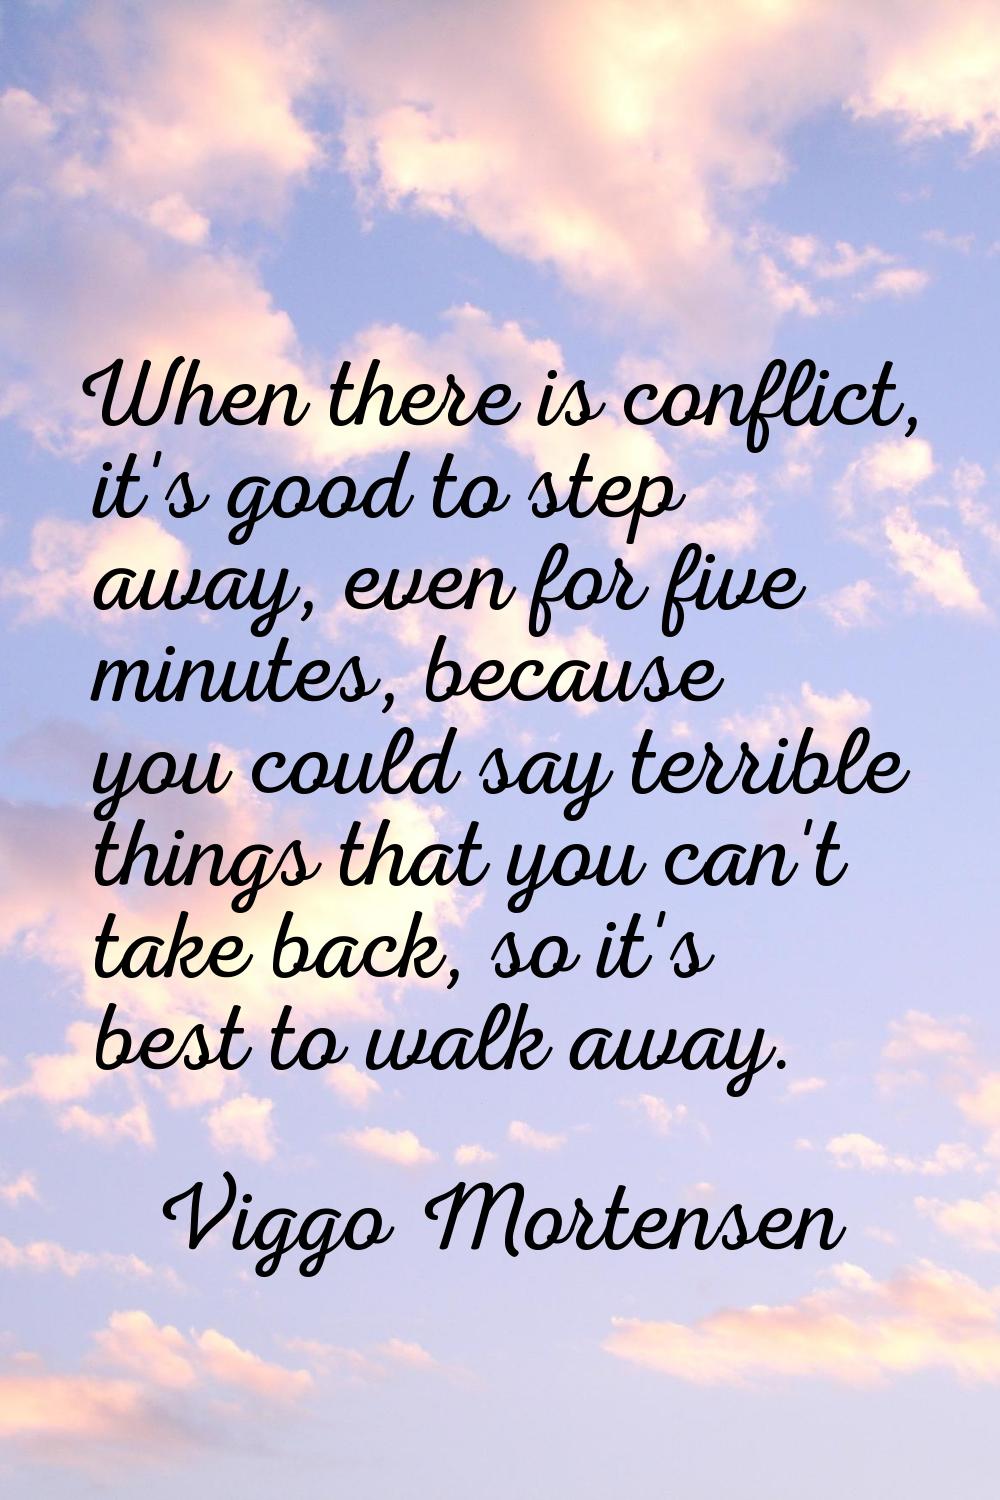 When there is conflict, it's good to step away, even for five minutes, because you could say terrib